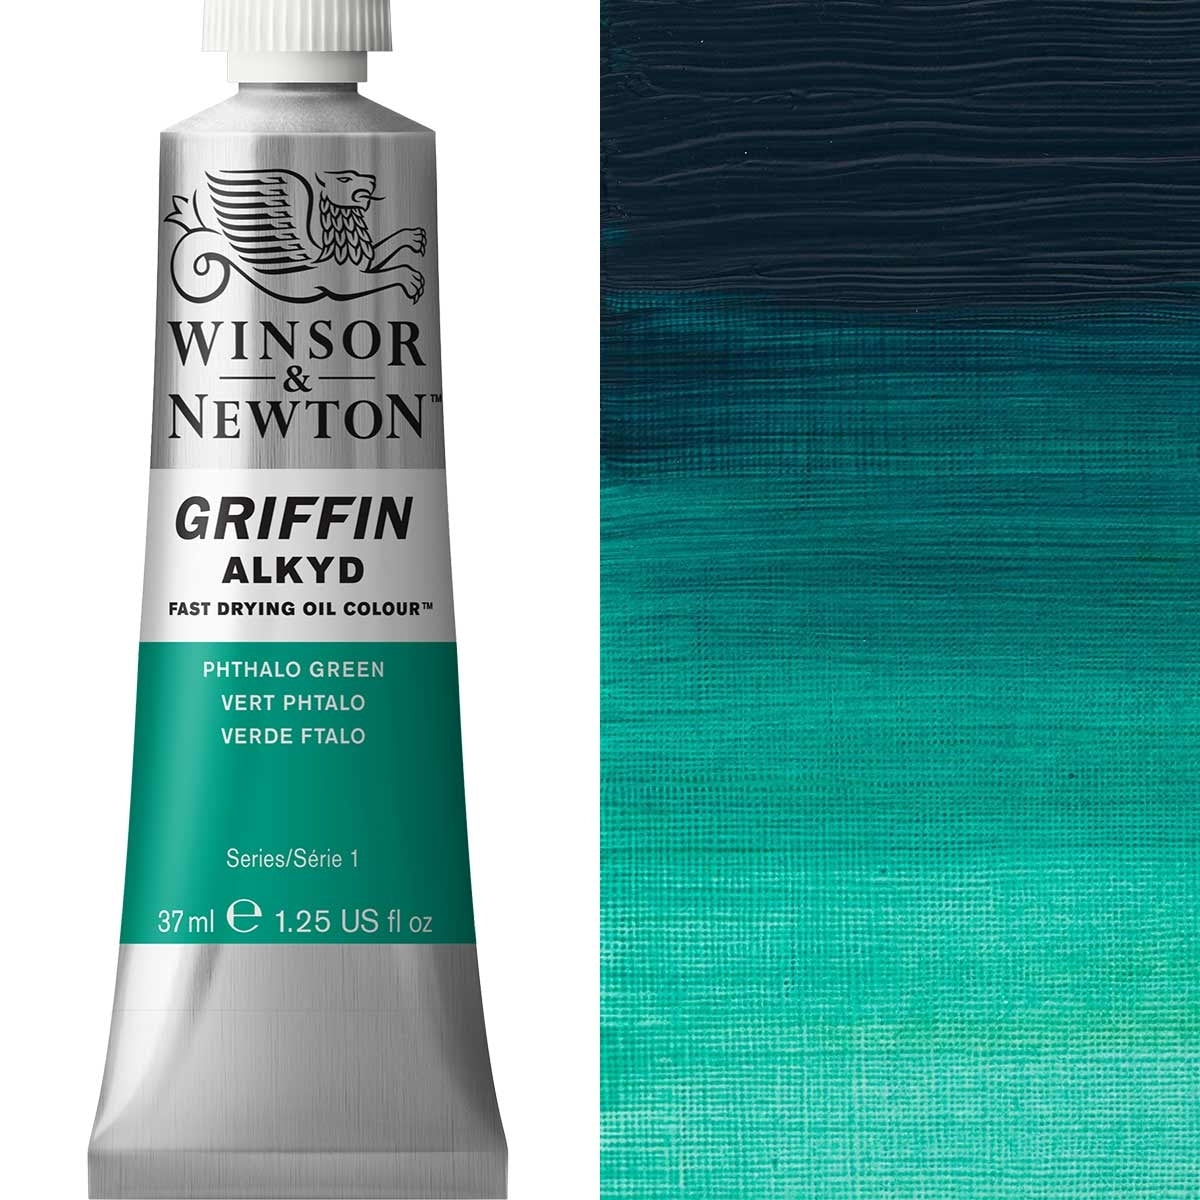 Winsor and Newton - Griffin ALKYD Oil Colour - 37ml - Phthalo Green